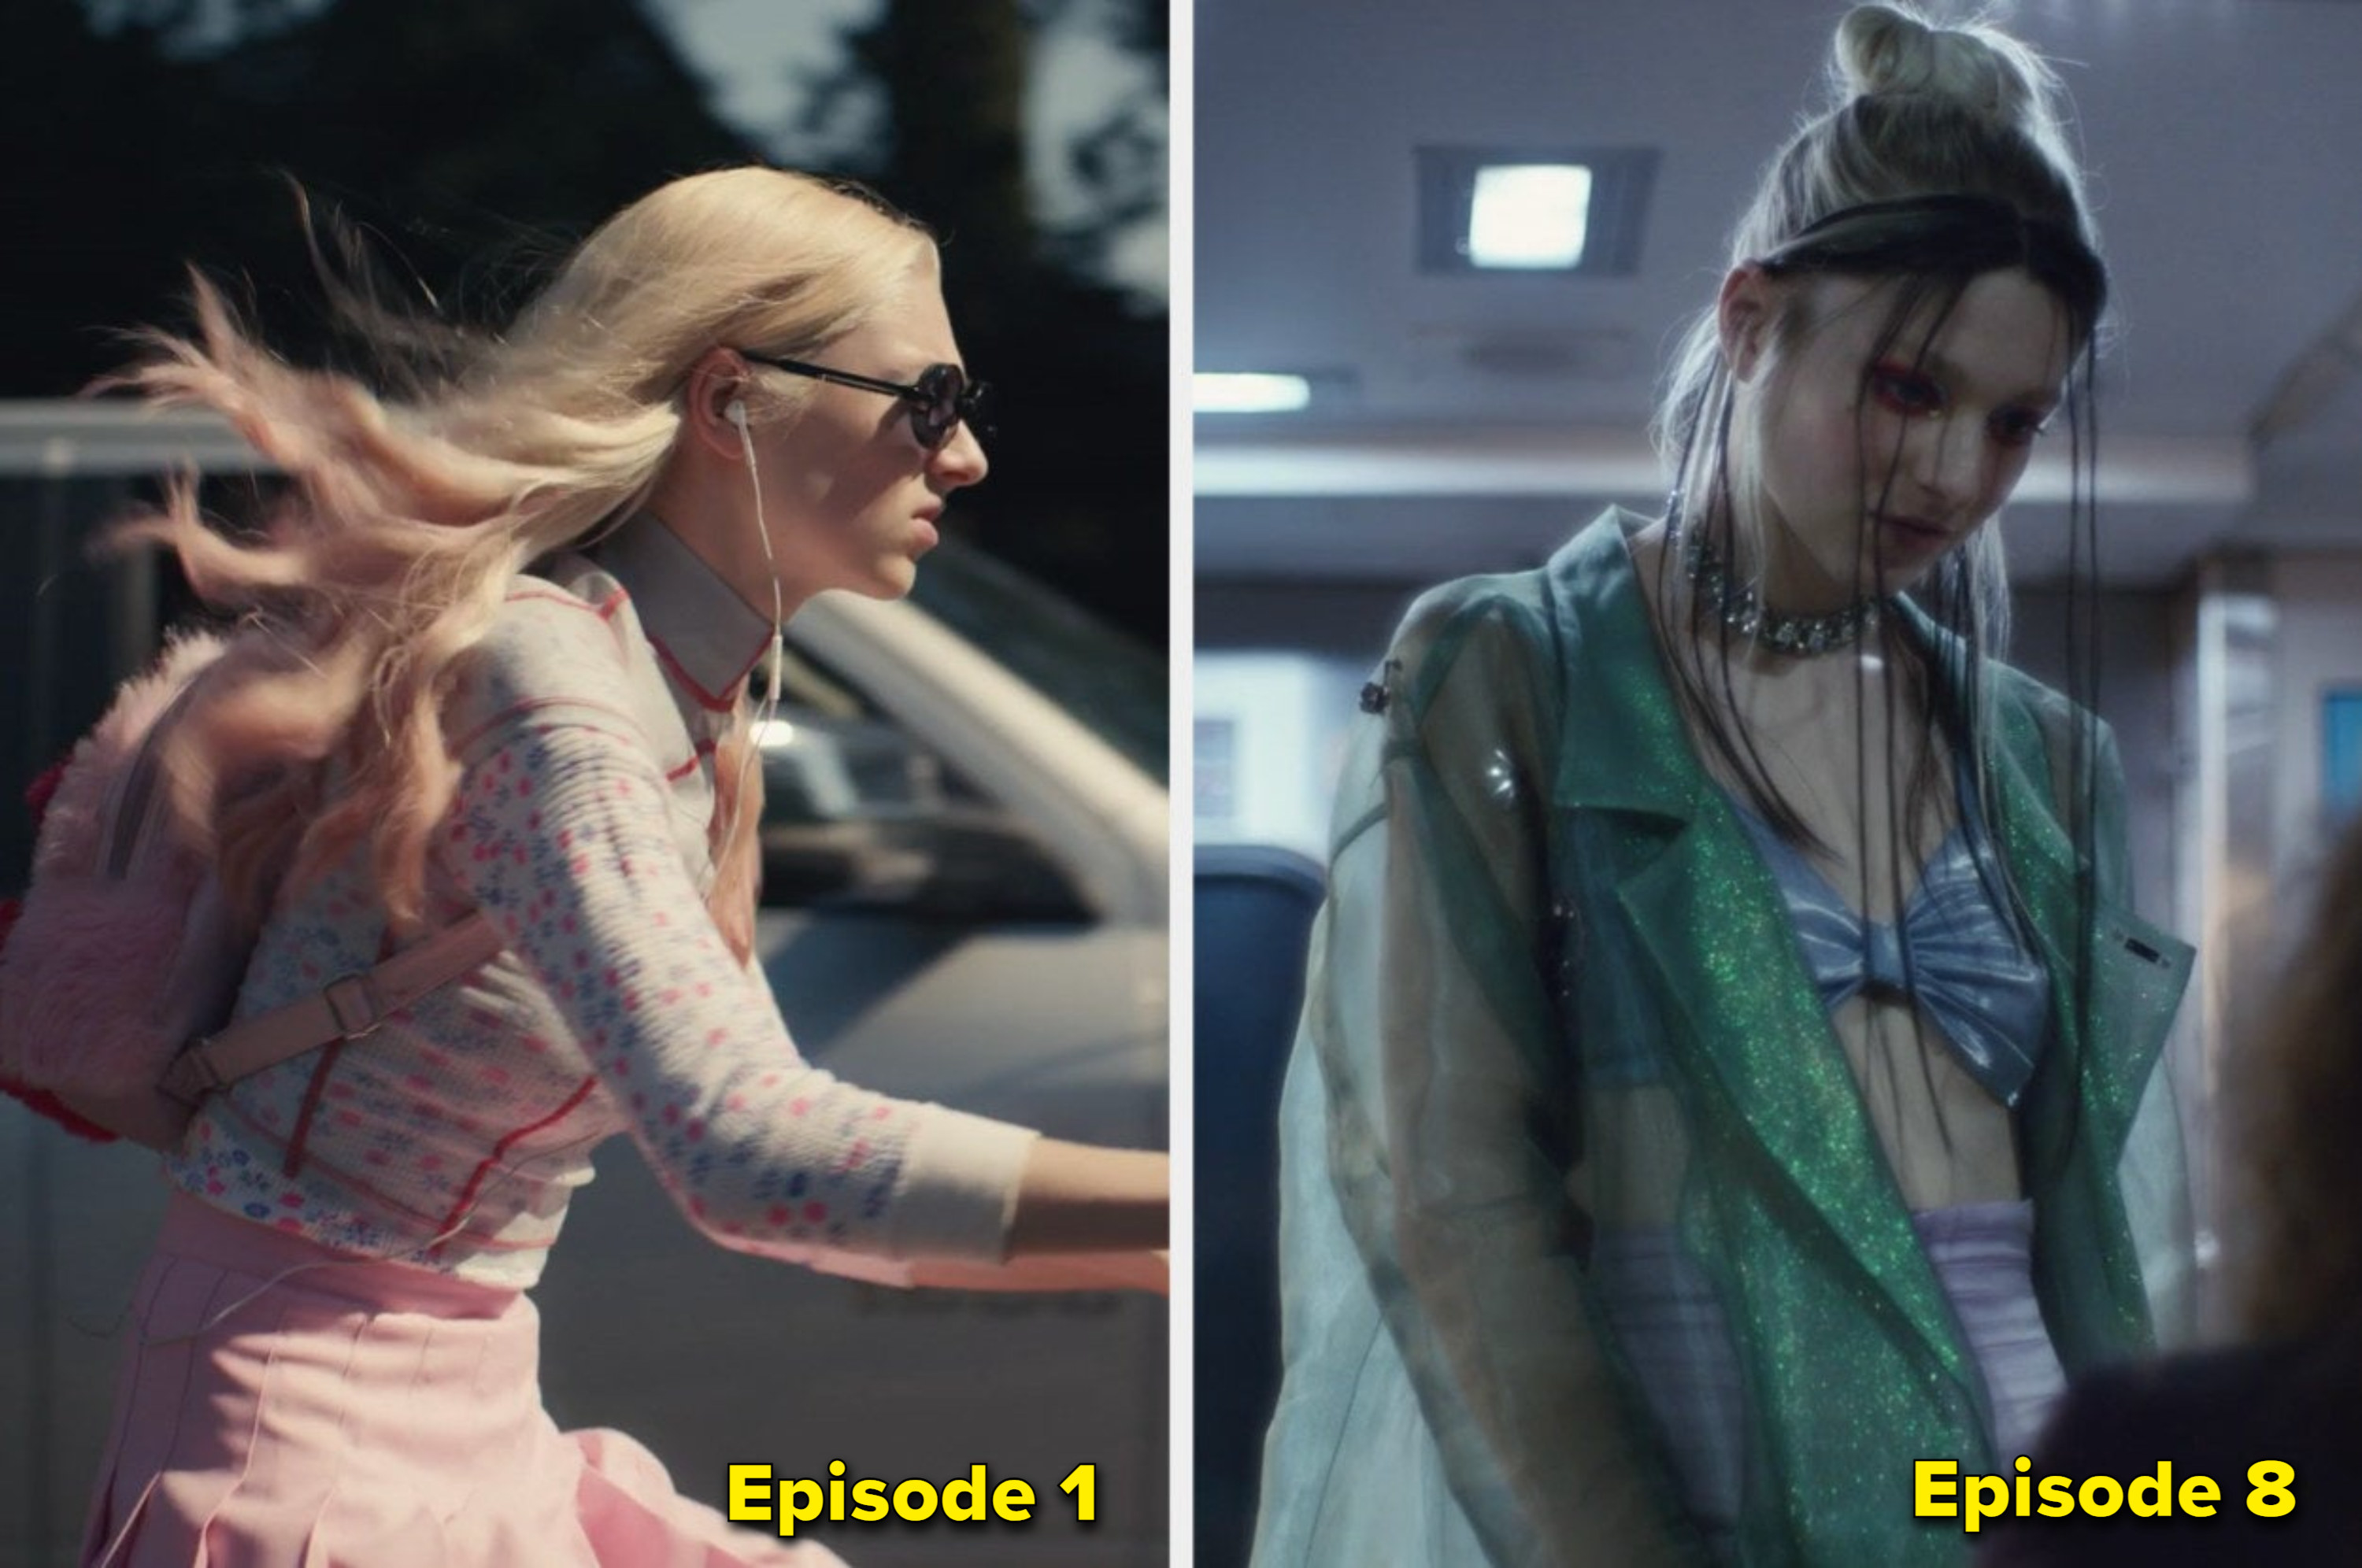 Episode one wearing a skirt and polka dot top and Episode 8 wearing darker colors and sheer button downs